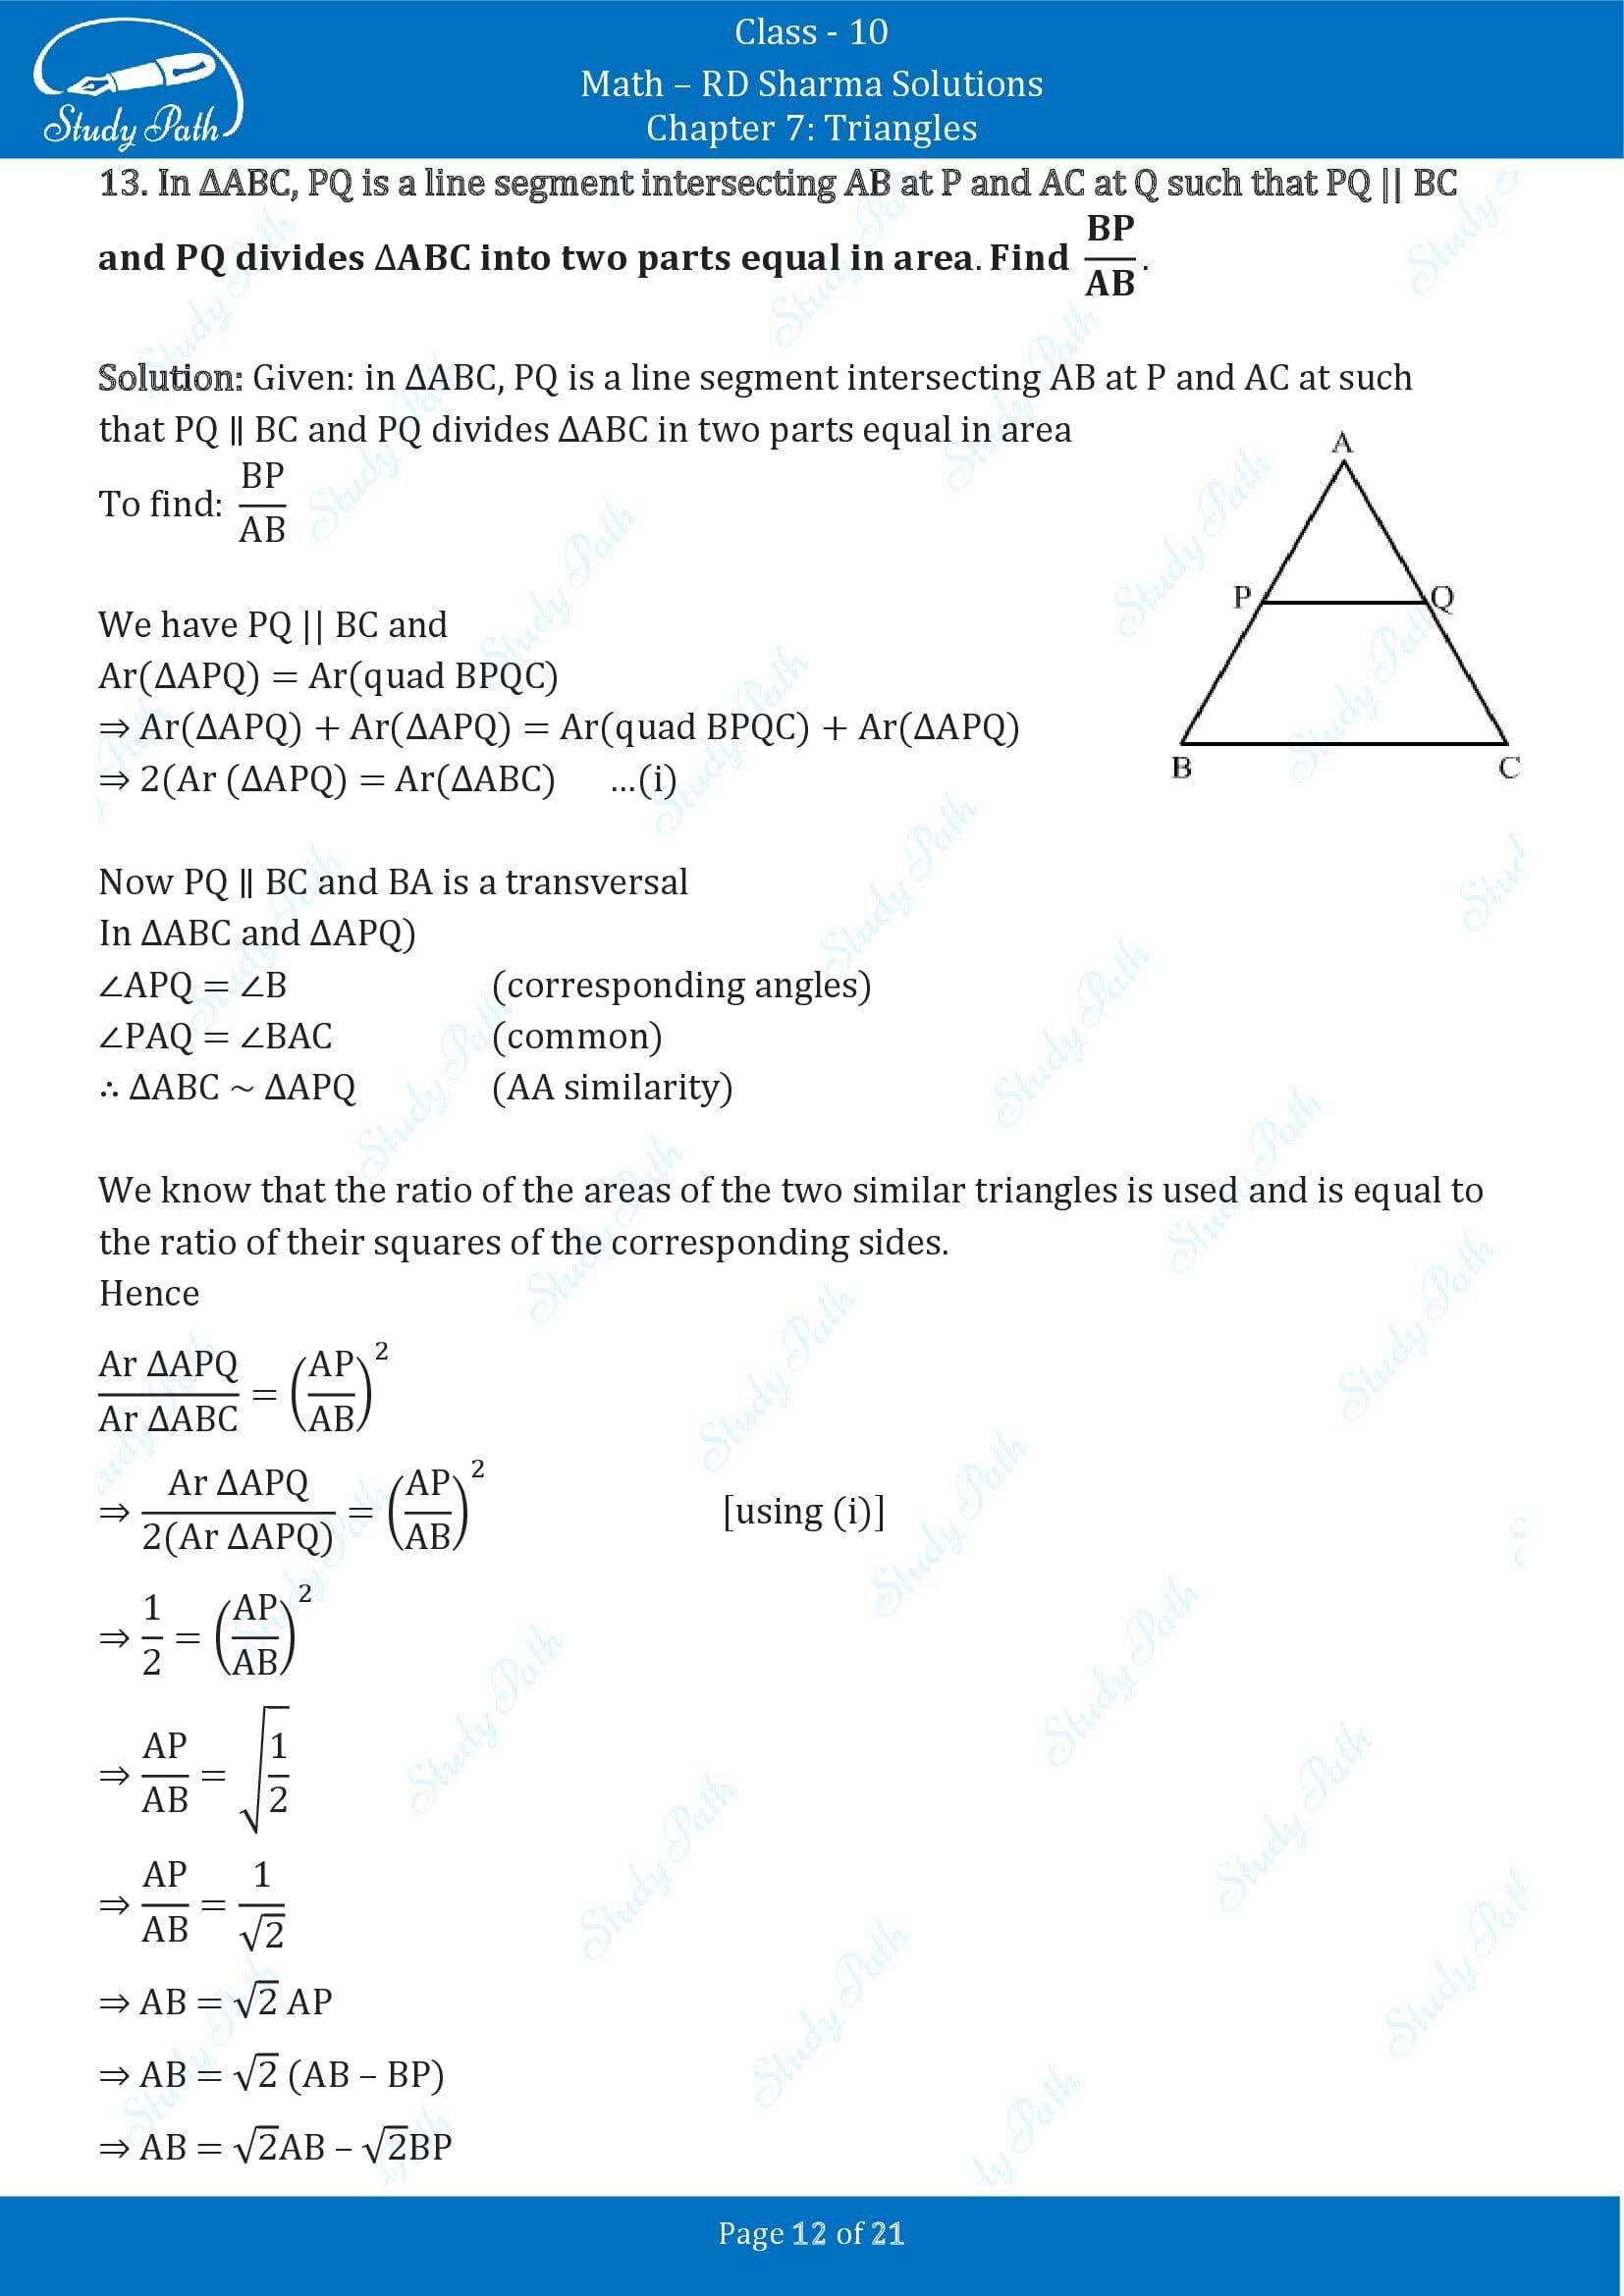 RD Sharma Solutions Class 10 Chapter 7 Triangles Exercise 7.6 00012